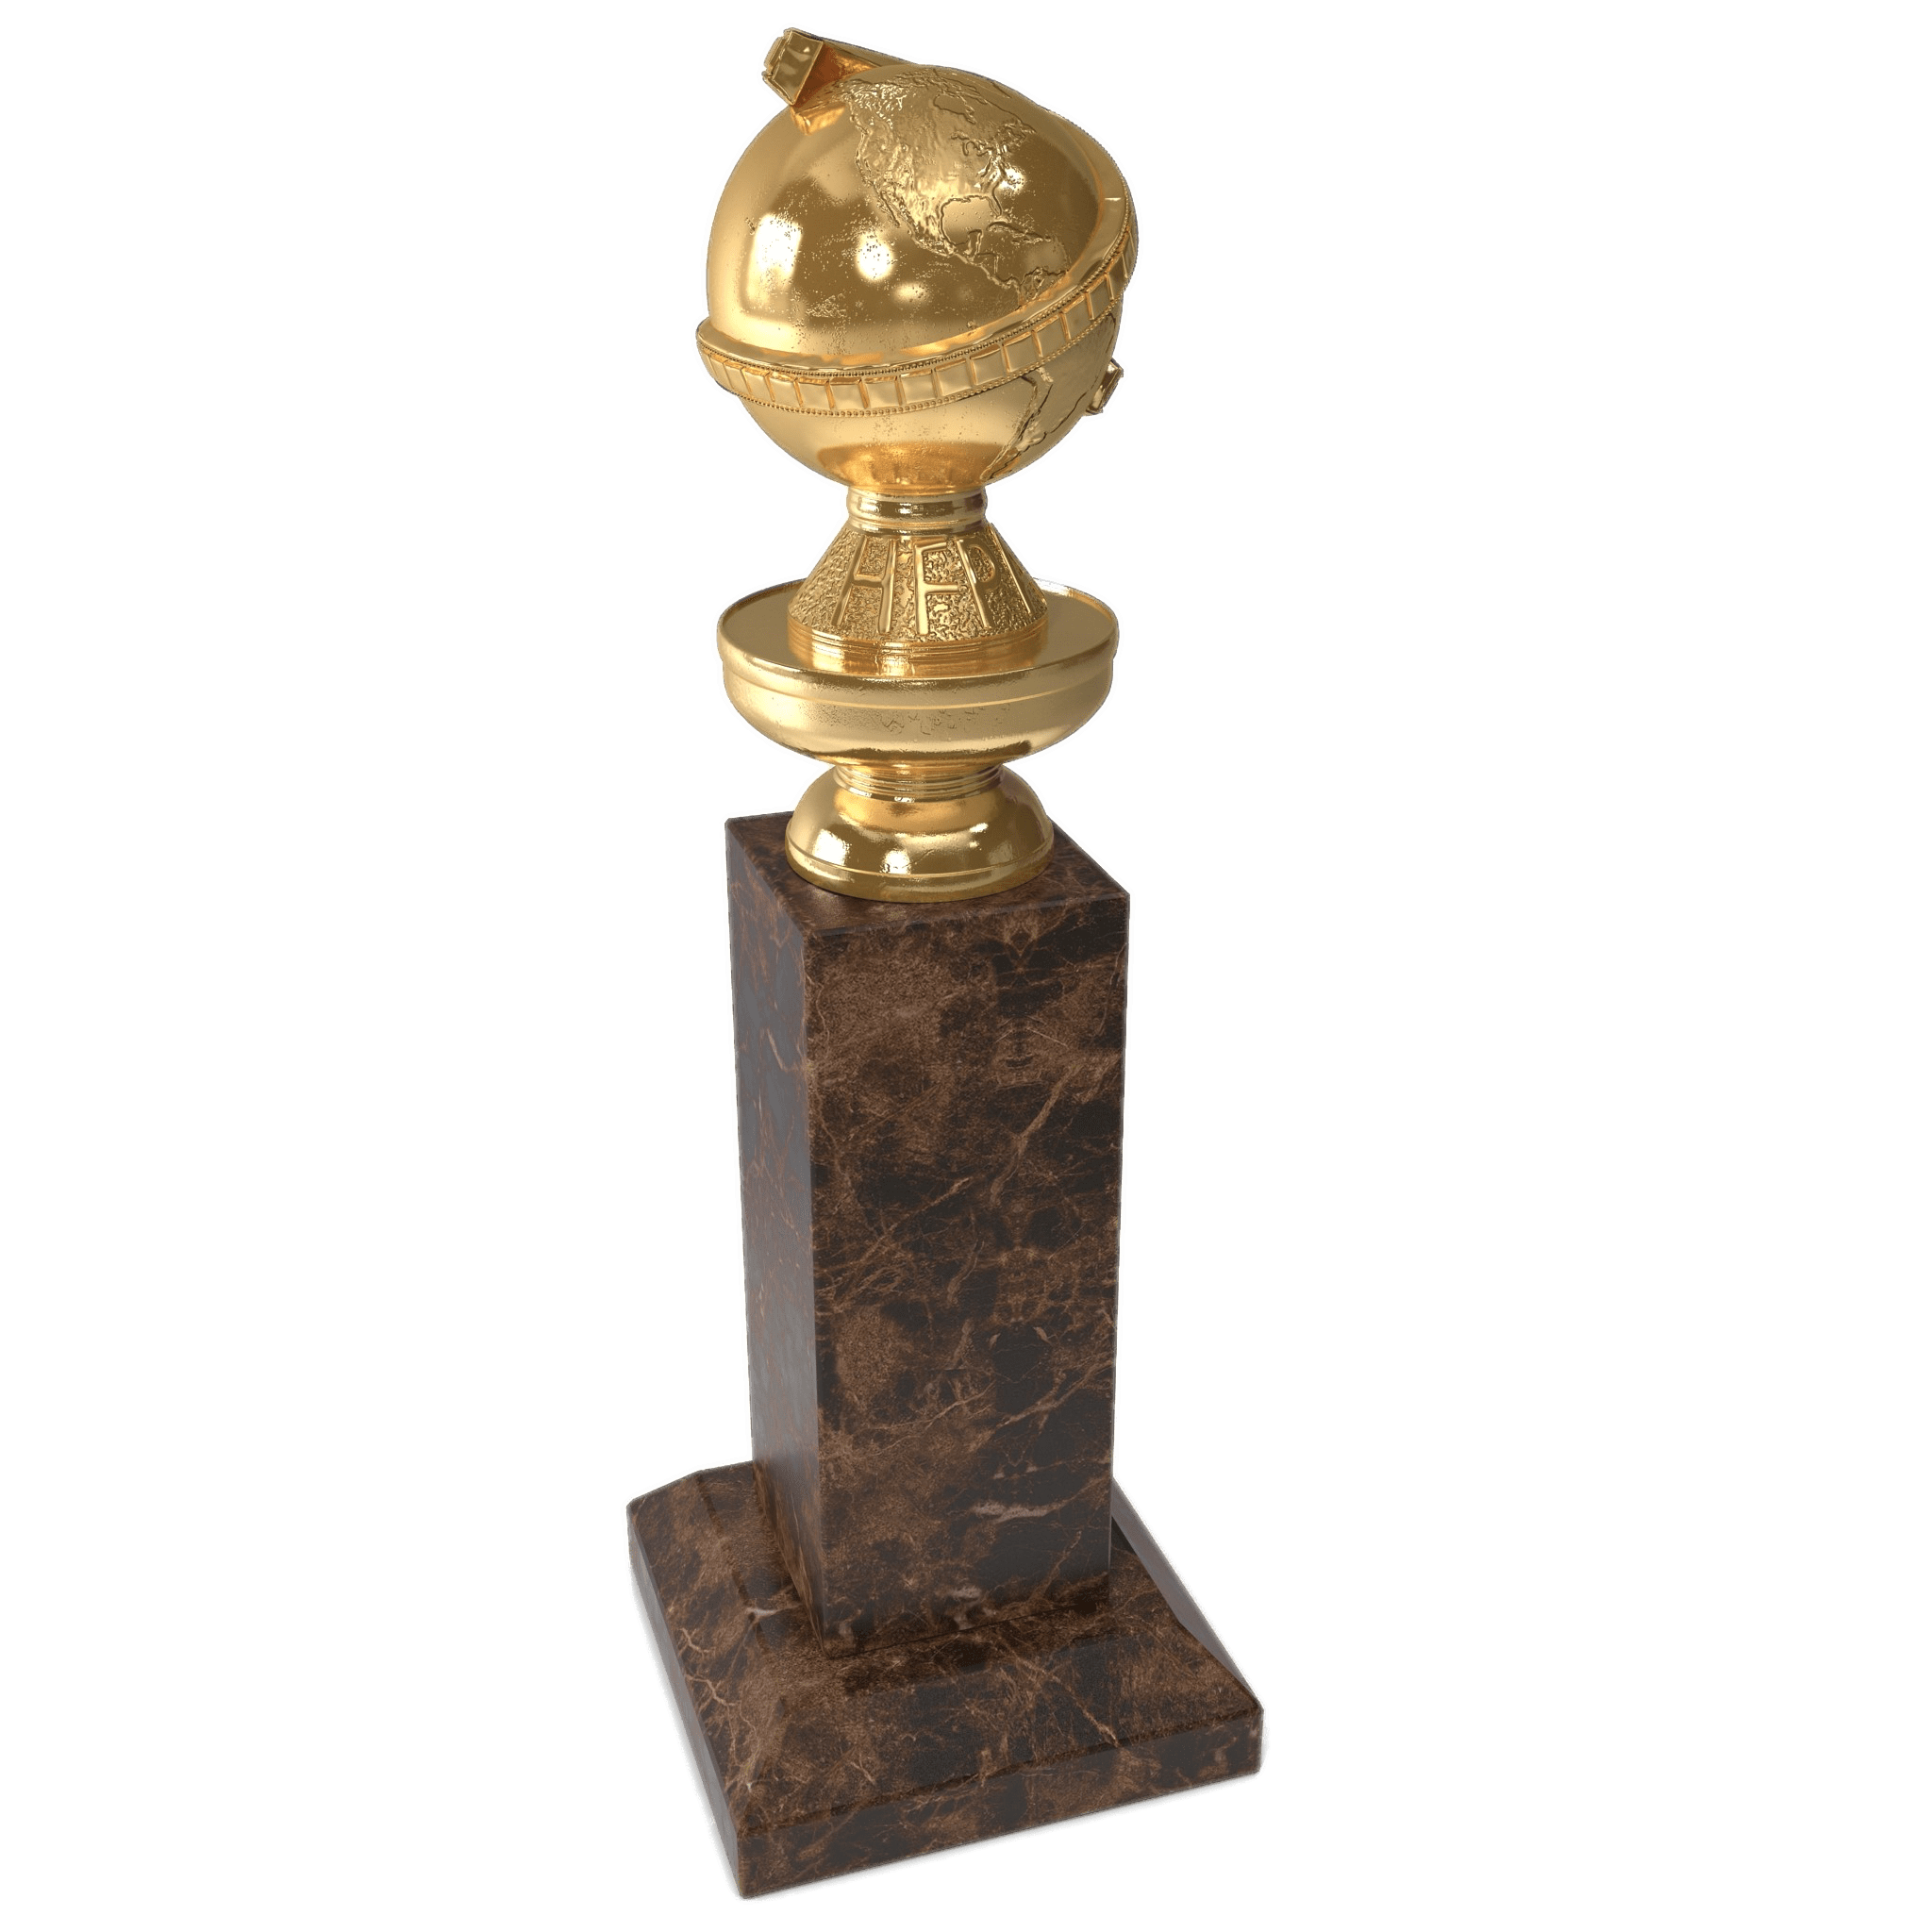 Golden Pic Award PNG Image High Quality PNG Image